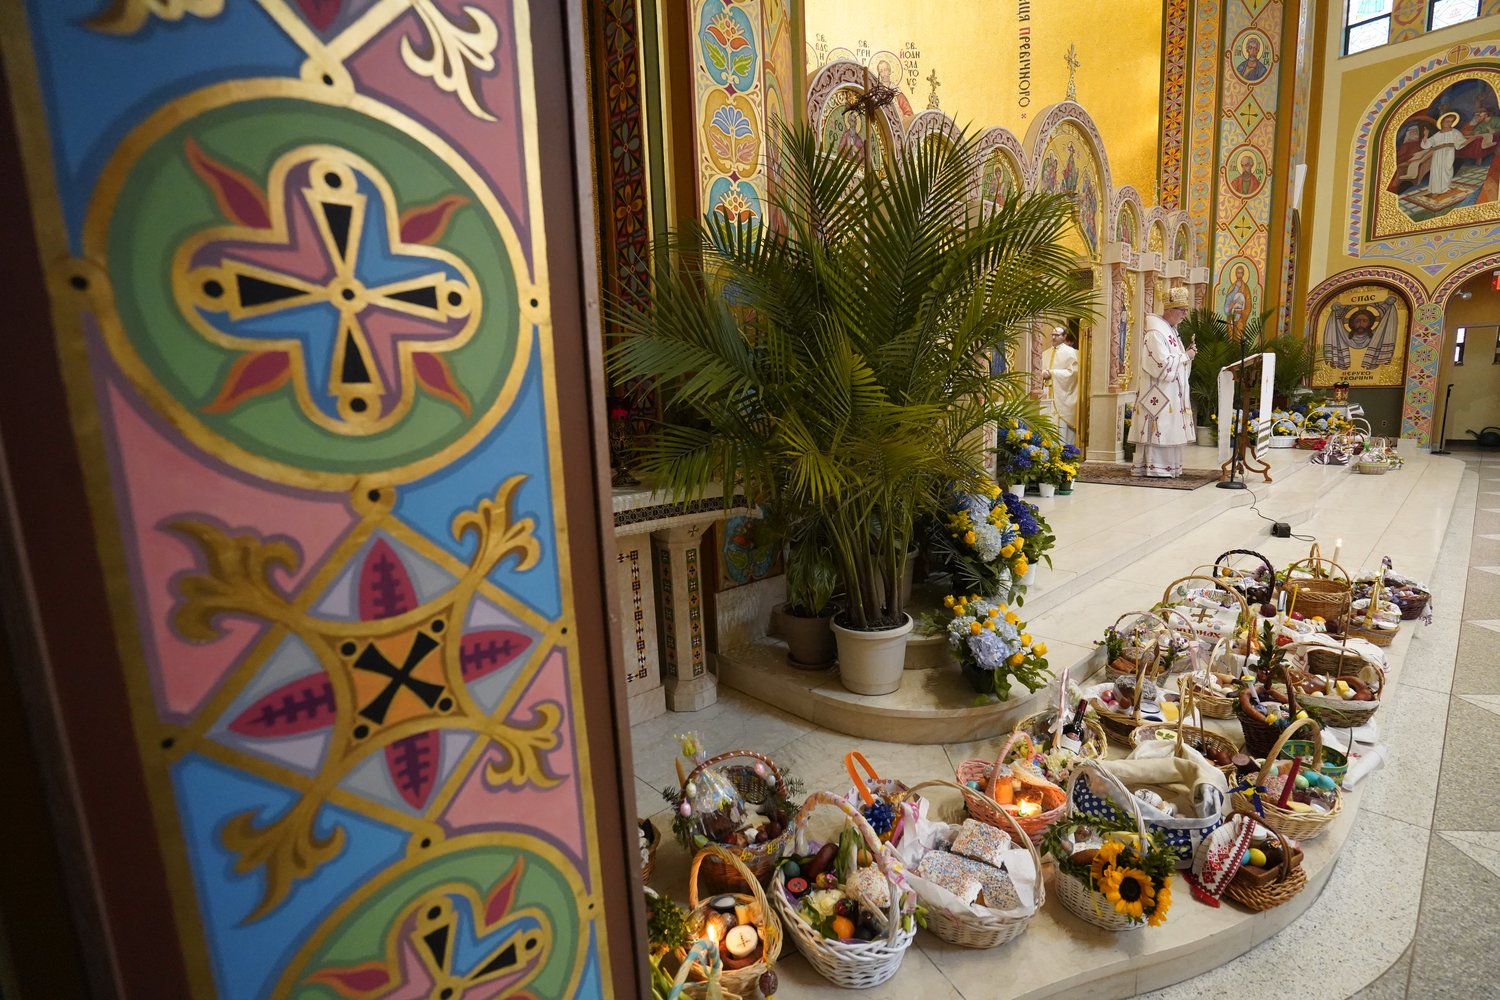 Easter baskets are seen near the sanctuary as Bishop Paul P. Chomnycky of the Ukrainian Catholic Eparchy of Stamford, Conn. celebrates an Easter Divine Liturgy April 24 at St. George Ukrainian Catholic Church in Manhattan’s East Village.